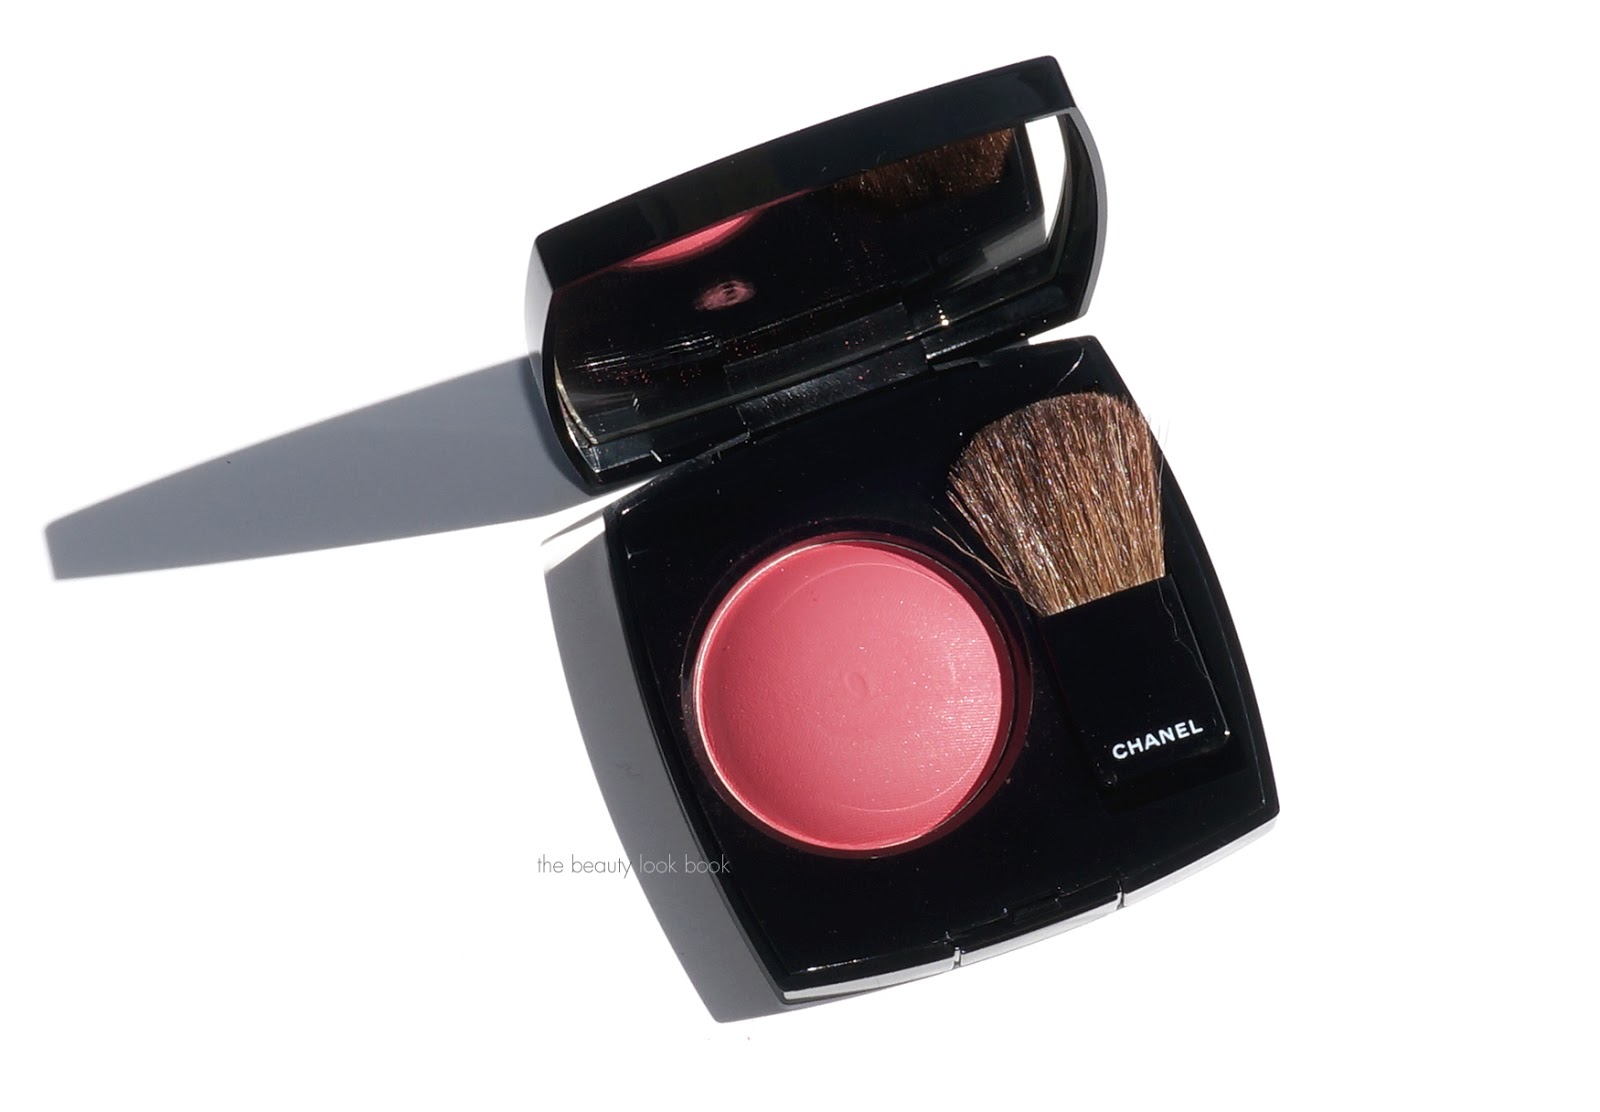 Chanel Joues Contraste Powder Blush in Golden Sun and Vibration and  Illuminating Powder Infiniment Chanel - The Beauty Look Book